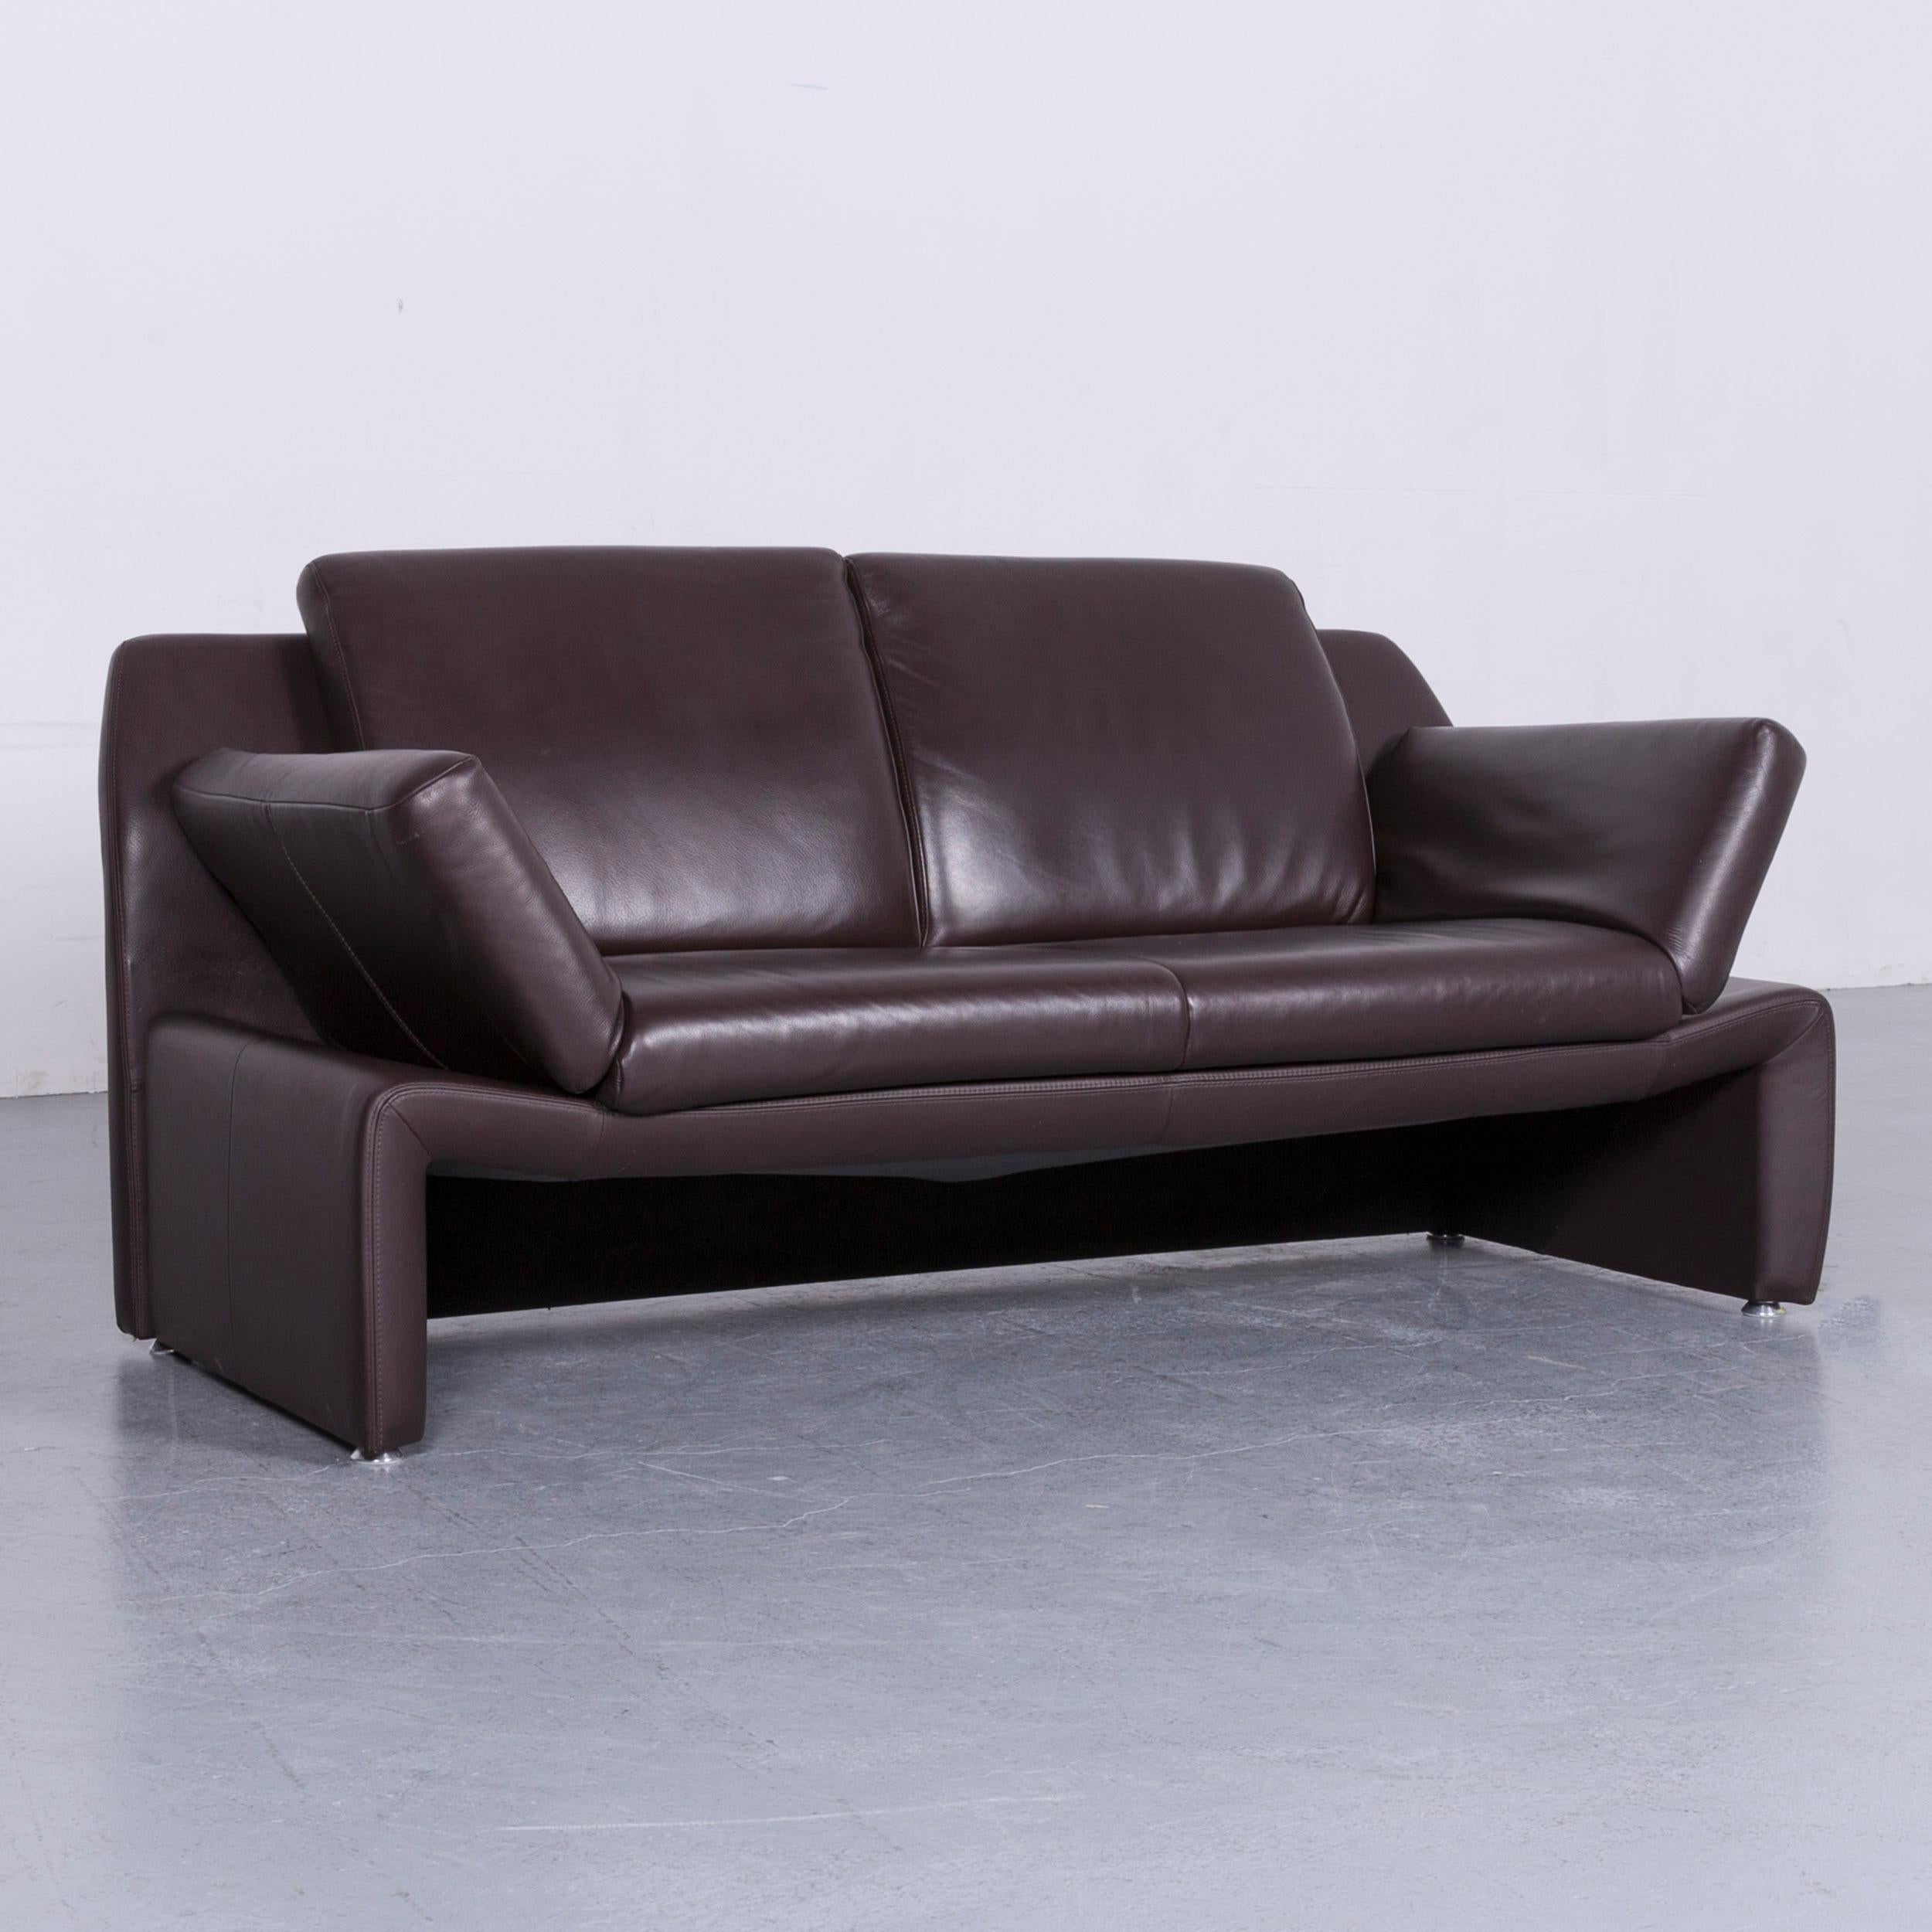 German Laauser Designer Leather Sofa Brown Two-Seat Couch For Sale